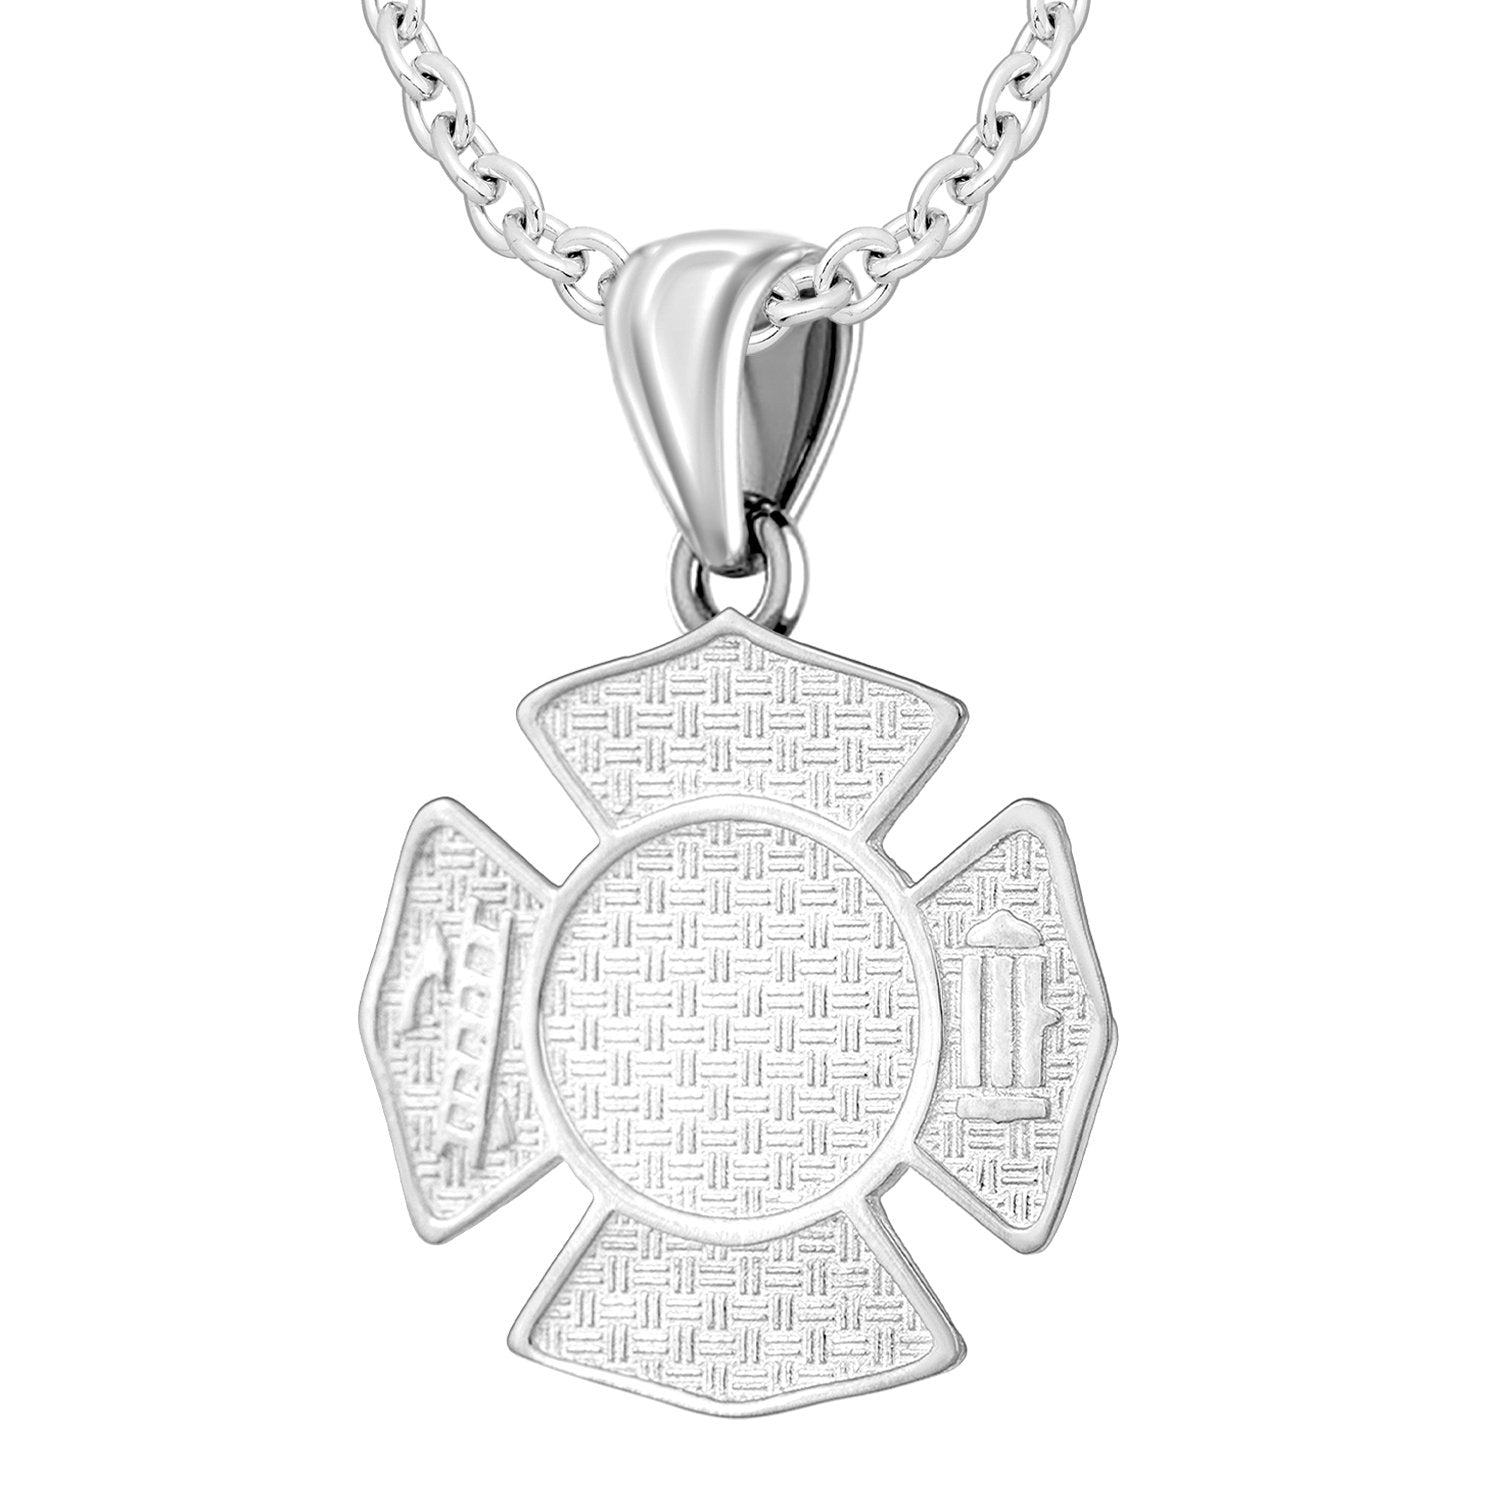 Firefighter Pendant of 26mm Length - 1.8mm Cable Chain